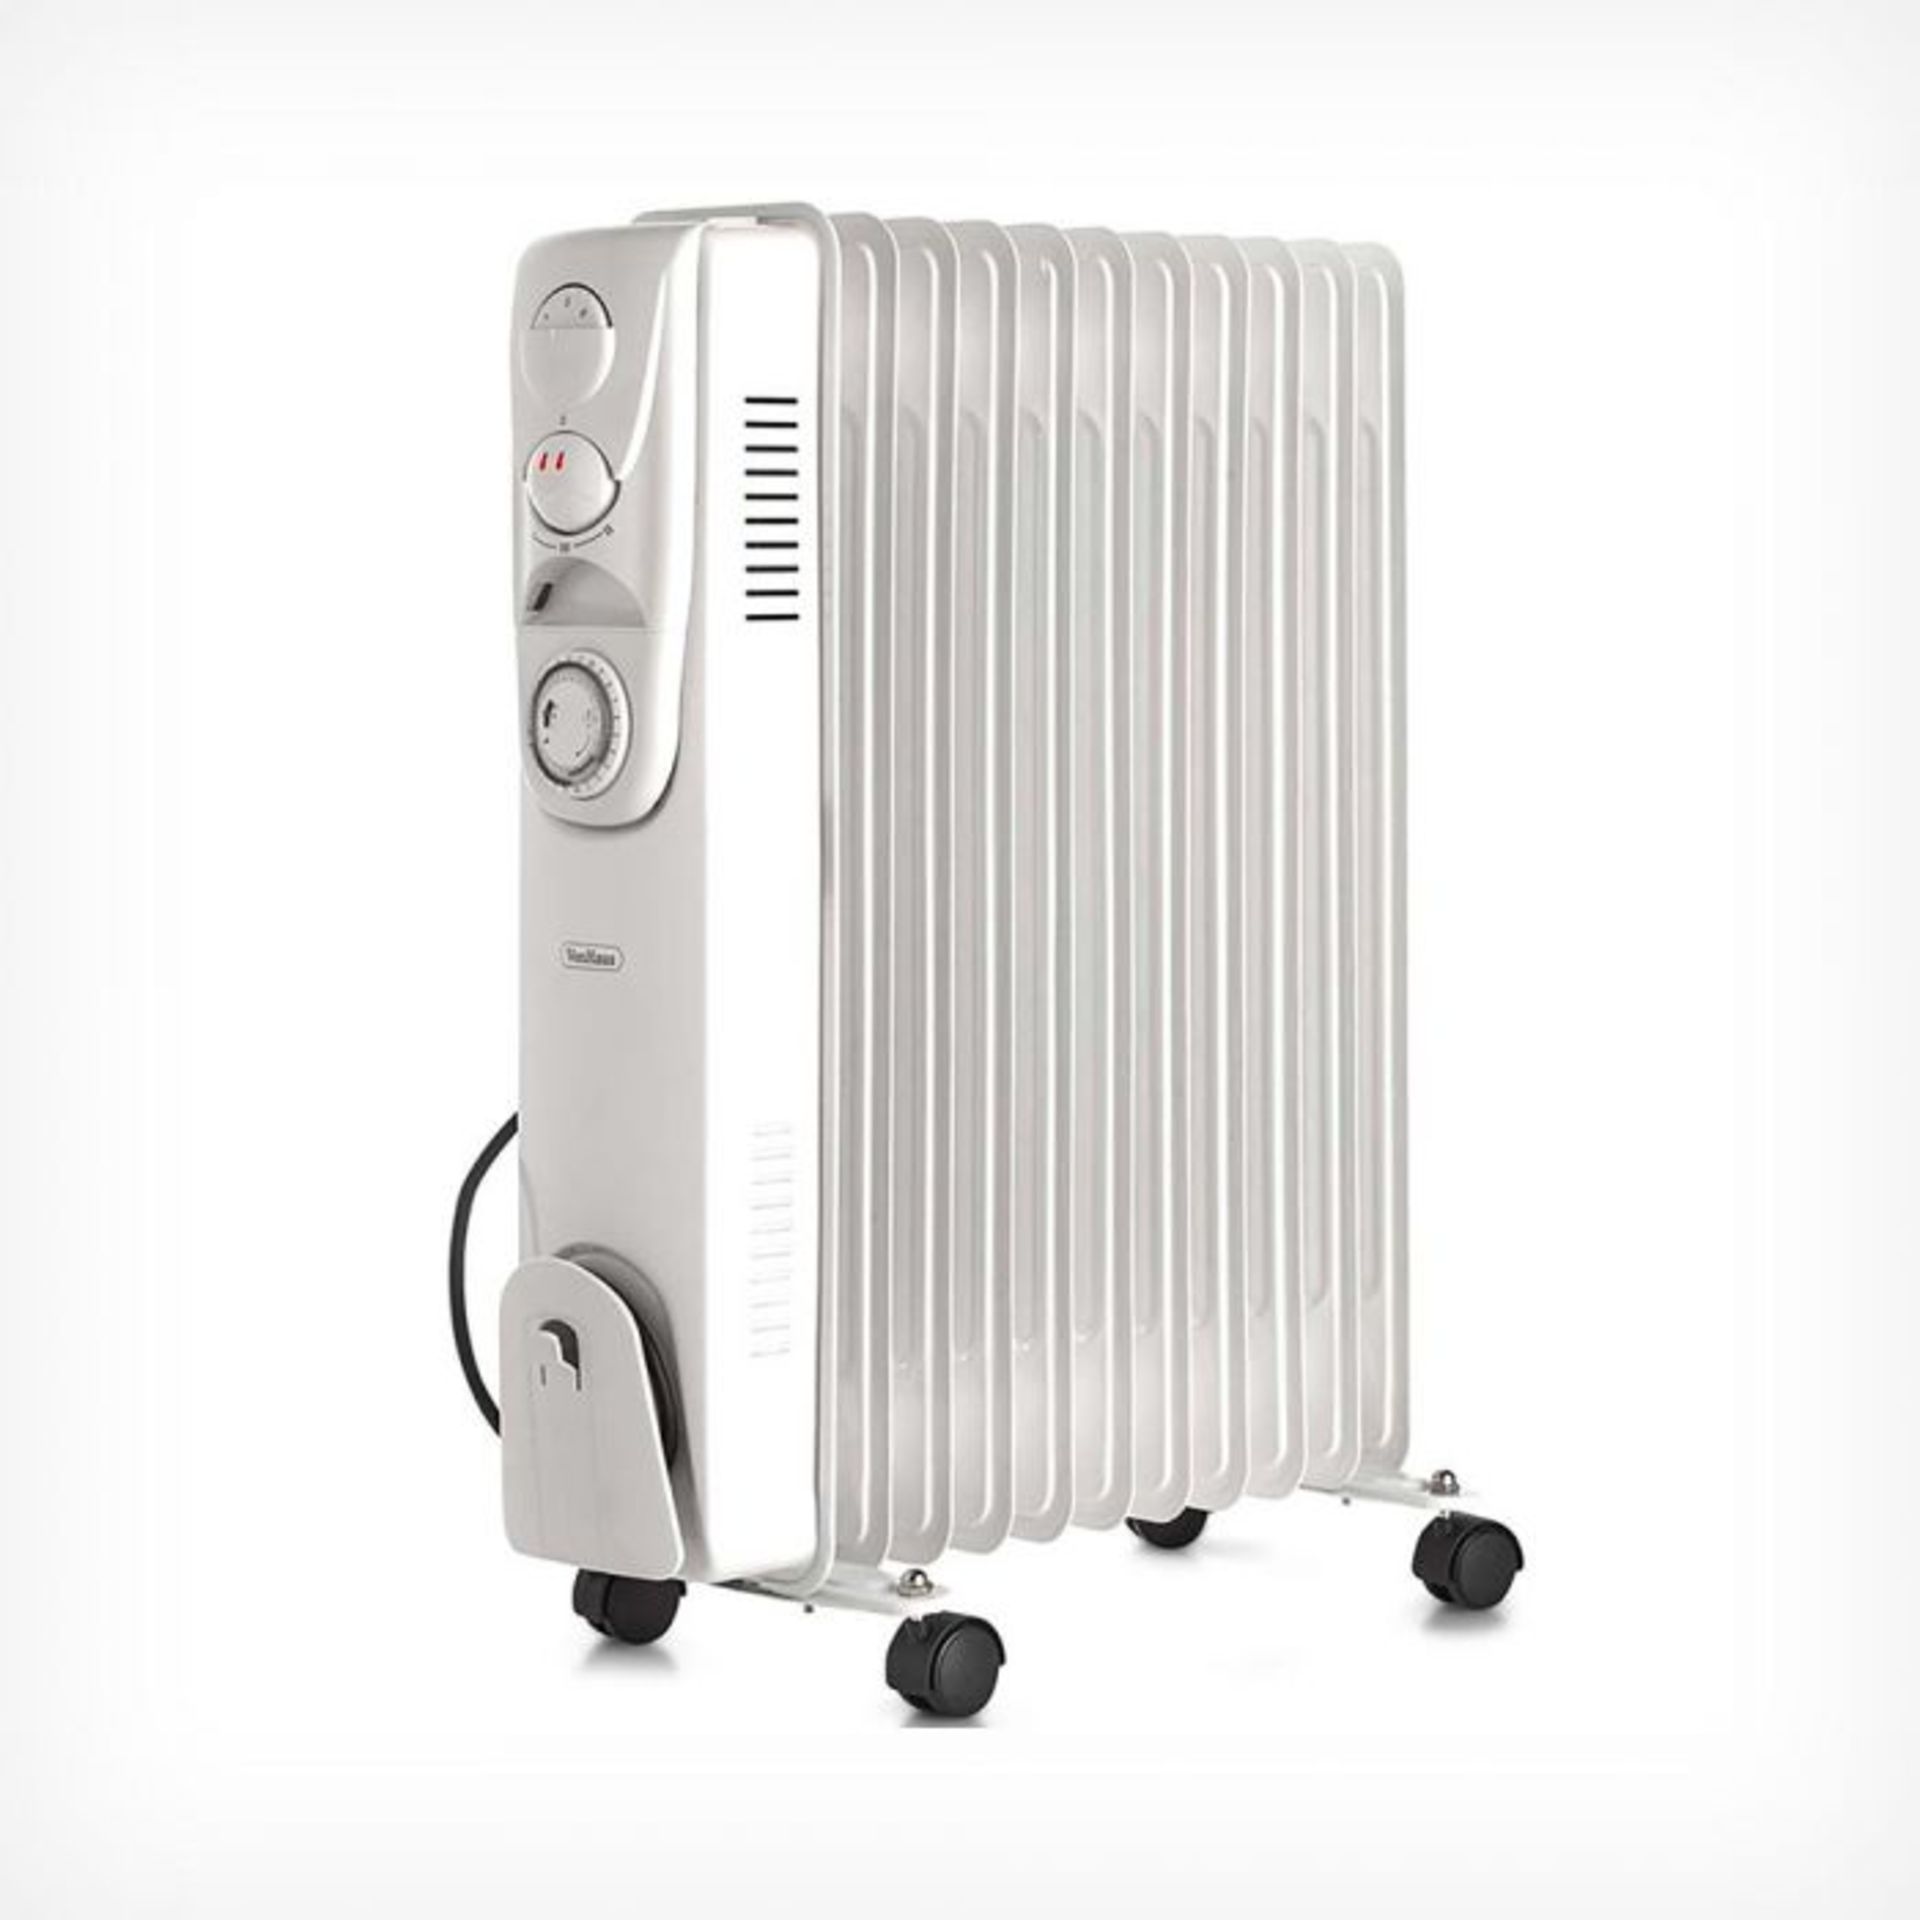 (V160) 11 Fin 2500W Oil Filled Radiator - White Suitable for areas up to 28 square metres 3 p... - Image 2 of 3